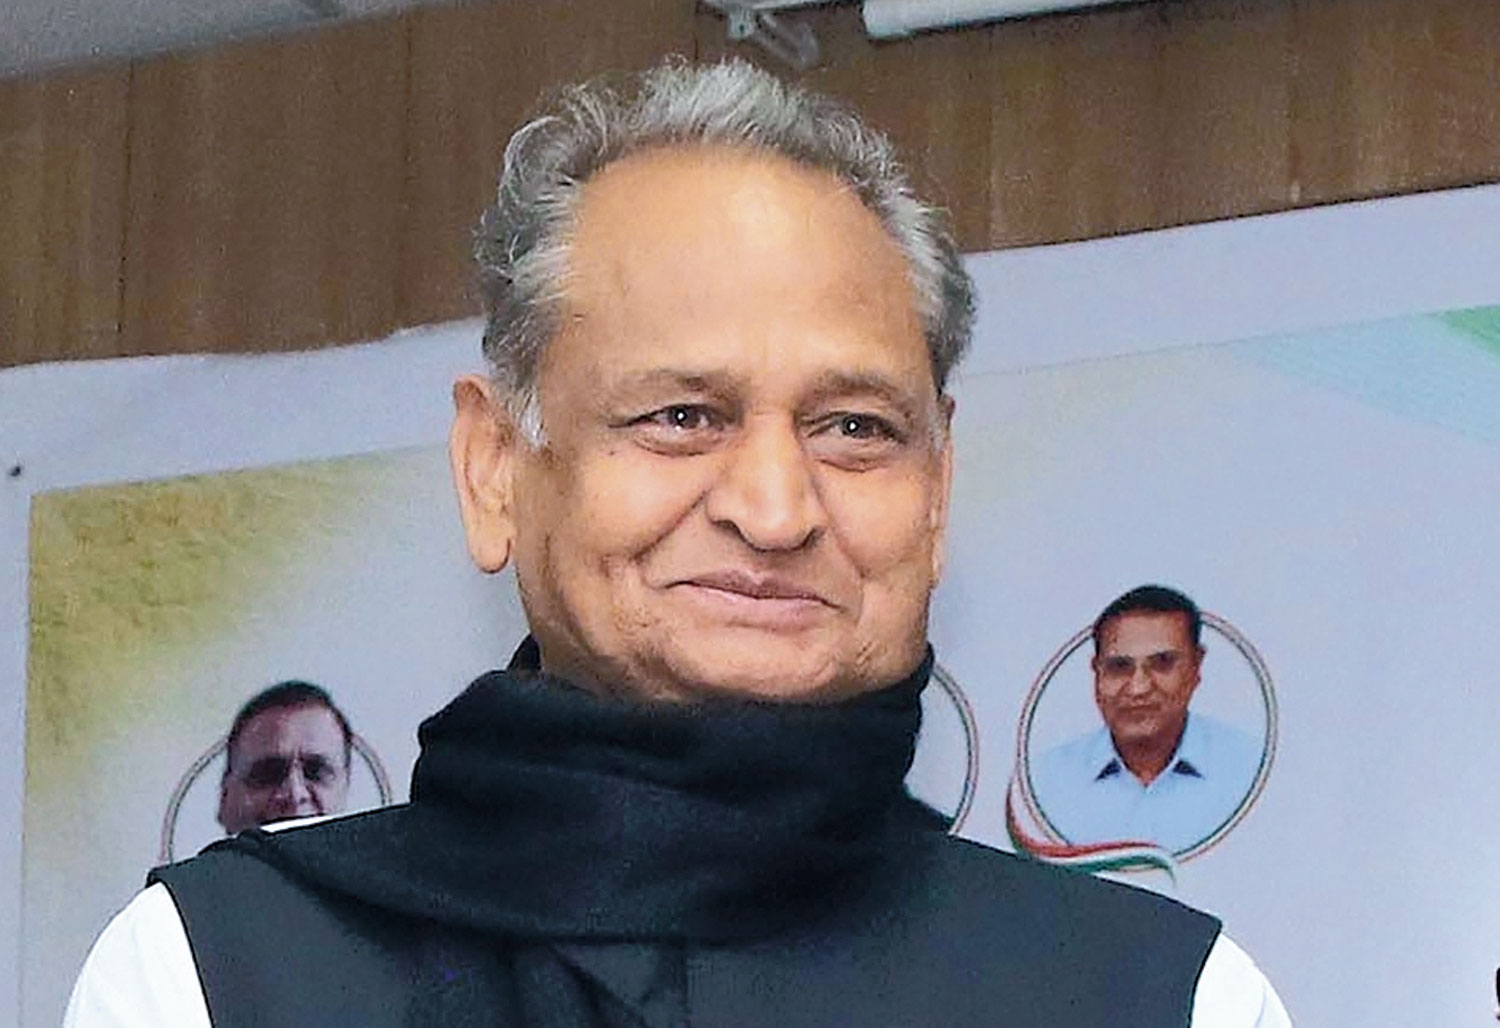 Govt wants to develop Rajasthan as centre of religious tourism: Rajasthan CM